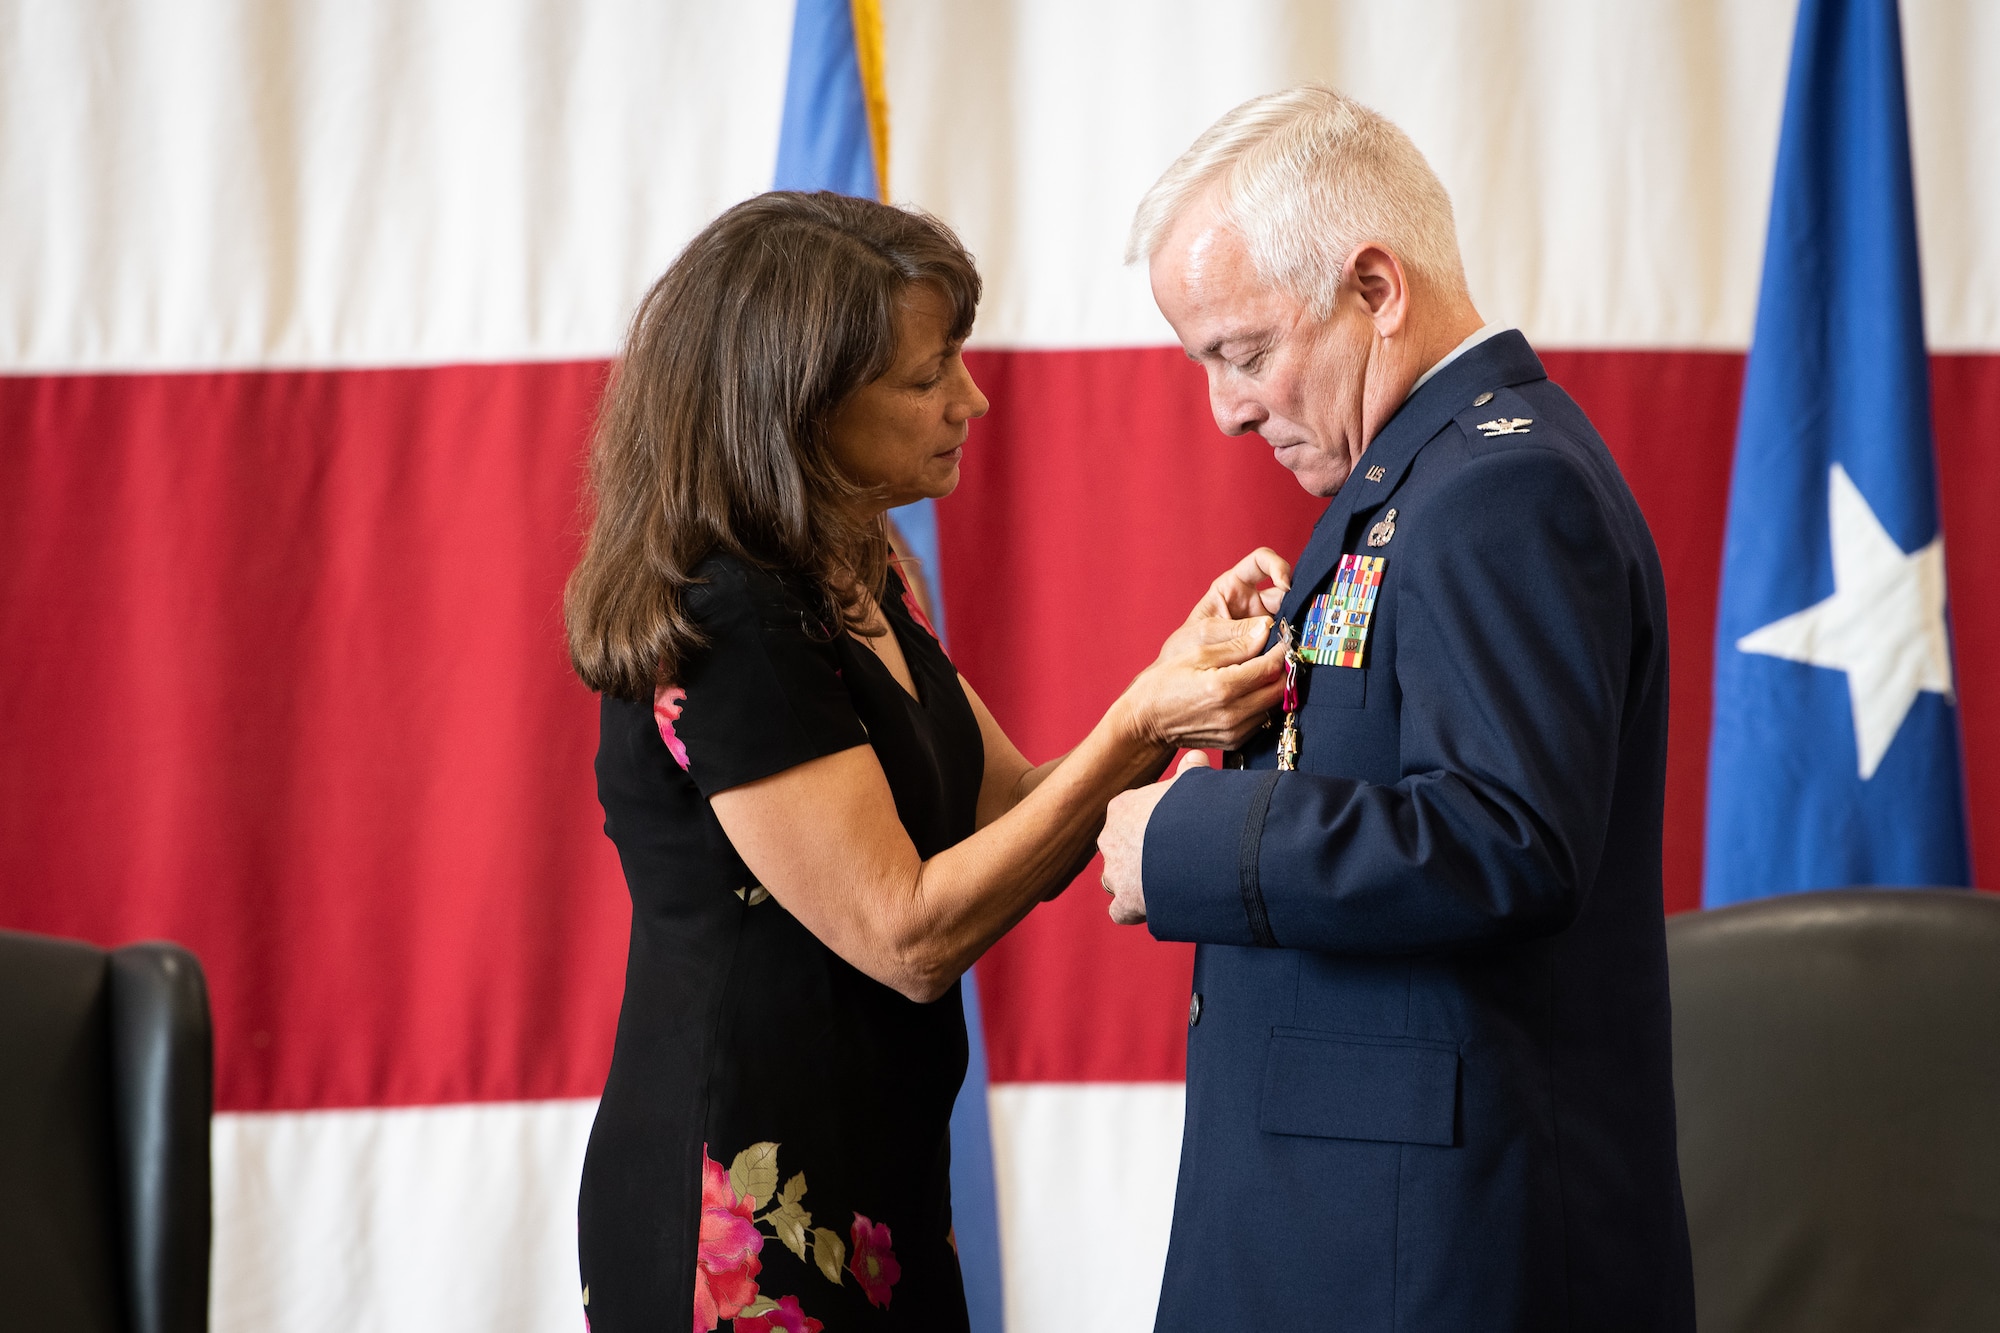 Terri Hayworth pins a retirement pin on Col. Douglas D. Hayworth, 137th Special Operations Wing (137th SOW) vice commander, during his retirement ceremony at Will Rogers Air National Guard Base in Oklahoma City, May 4, 2018. Hayworth retired after serving more than 30 years with the Wing. (U.S. Air National Guard photo by Senior Airman Jordan Martin)